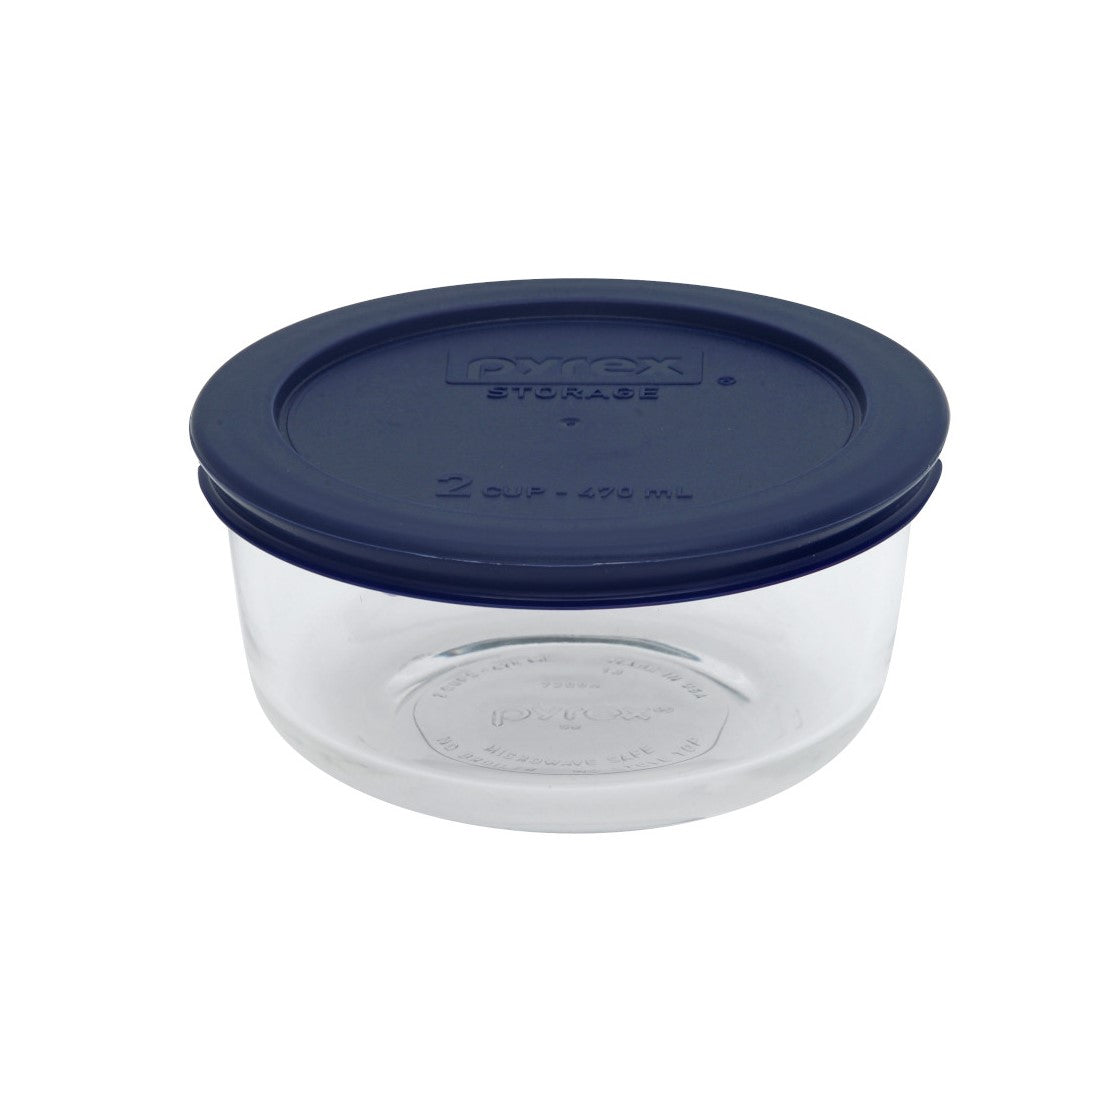 Pyrex® Simply Store Blue Round 2 Cup